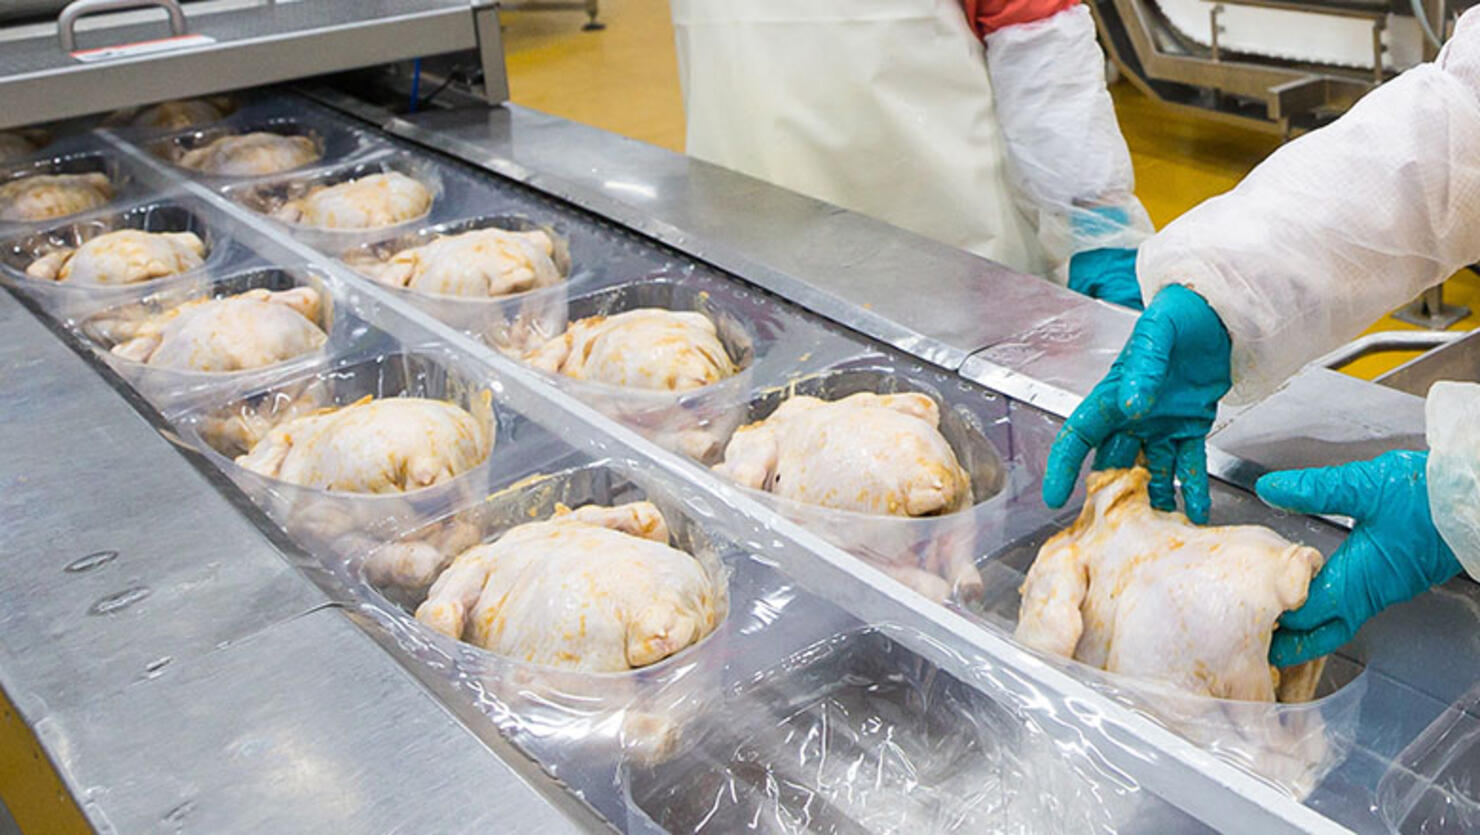 Workers handling raw chickens